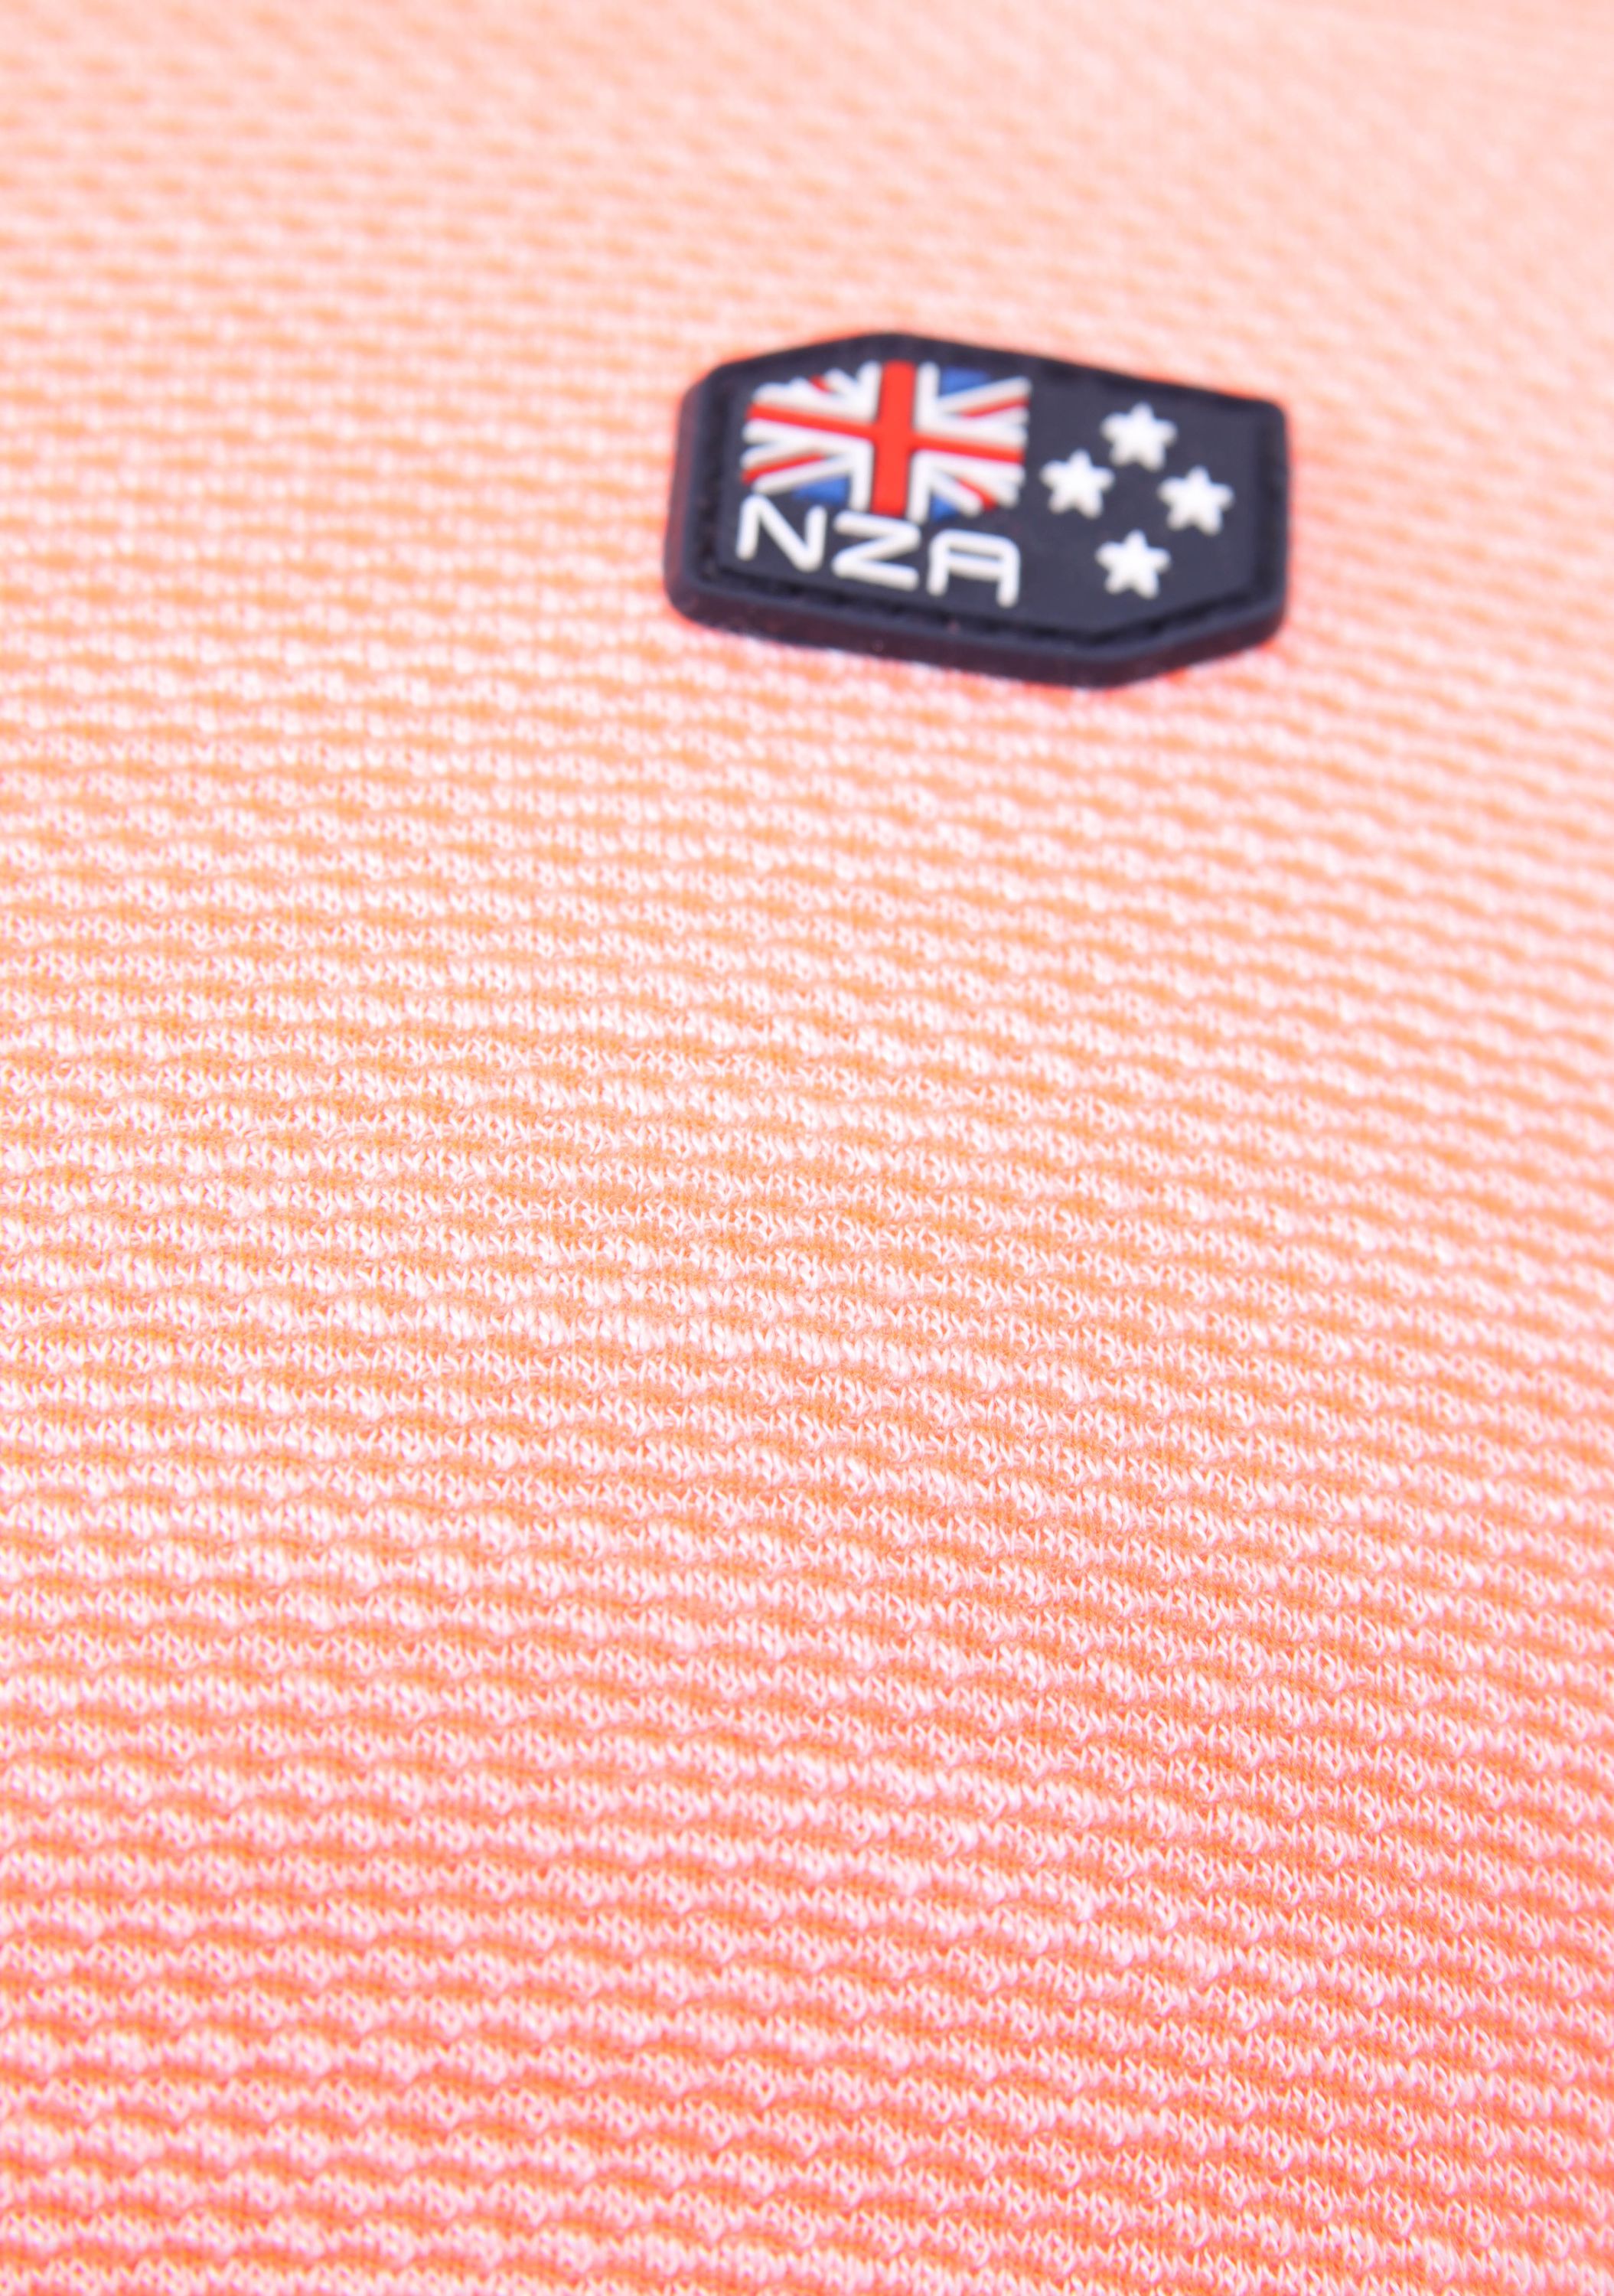 NZA NEW ZEALAND AUCKLAND POLO